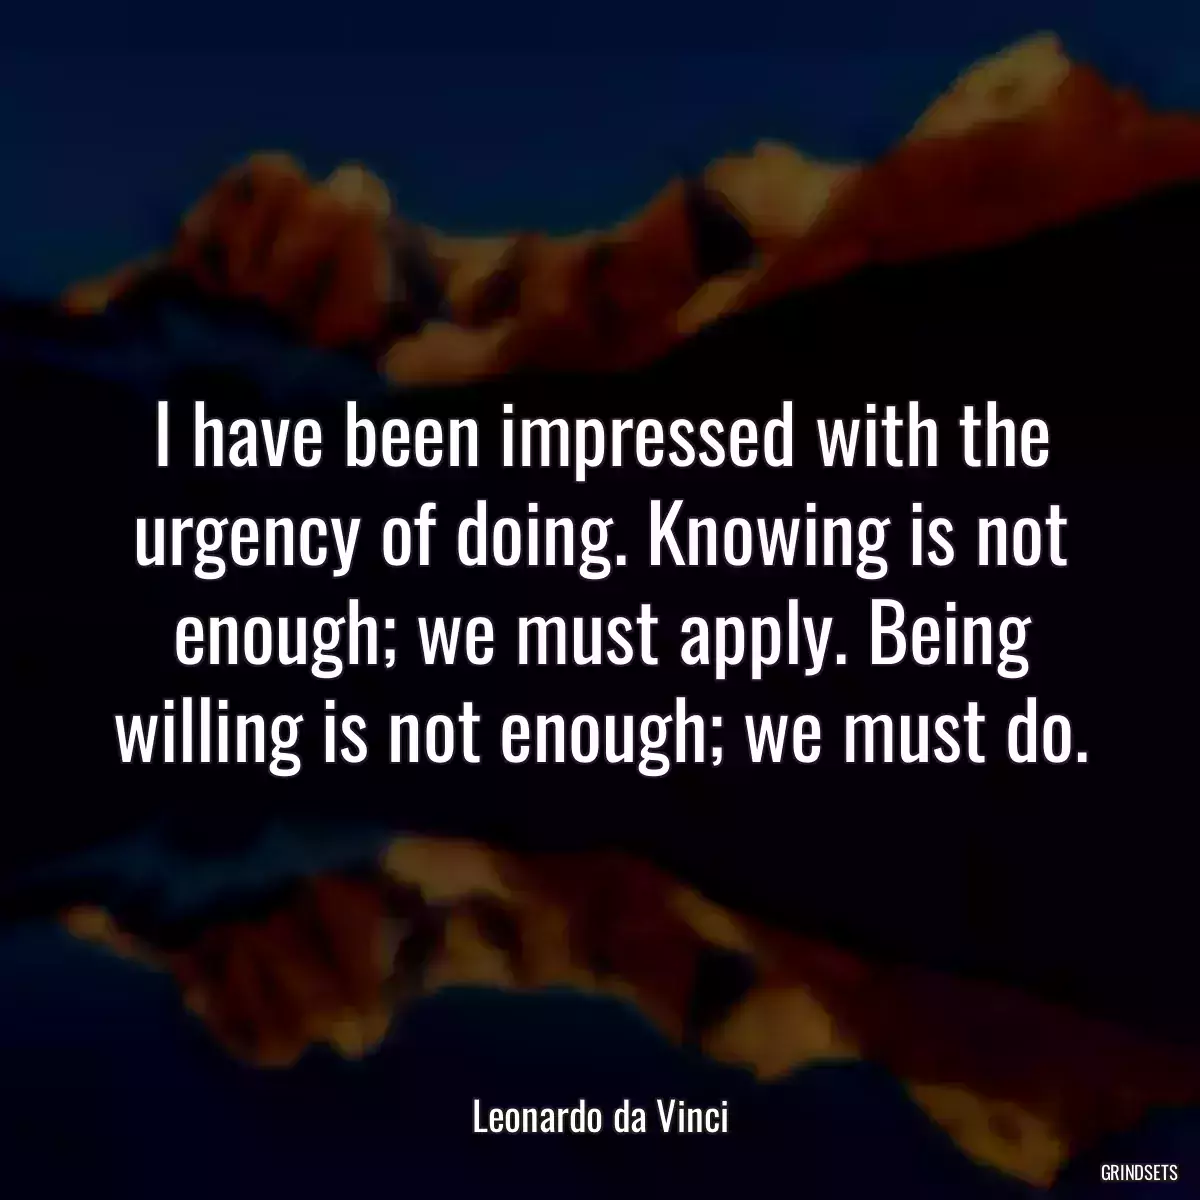 I have been impressed with the urgency of doing. Knowing is not enough; we must apply. Being willing is not enough; we must do.